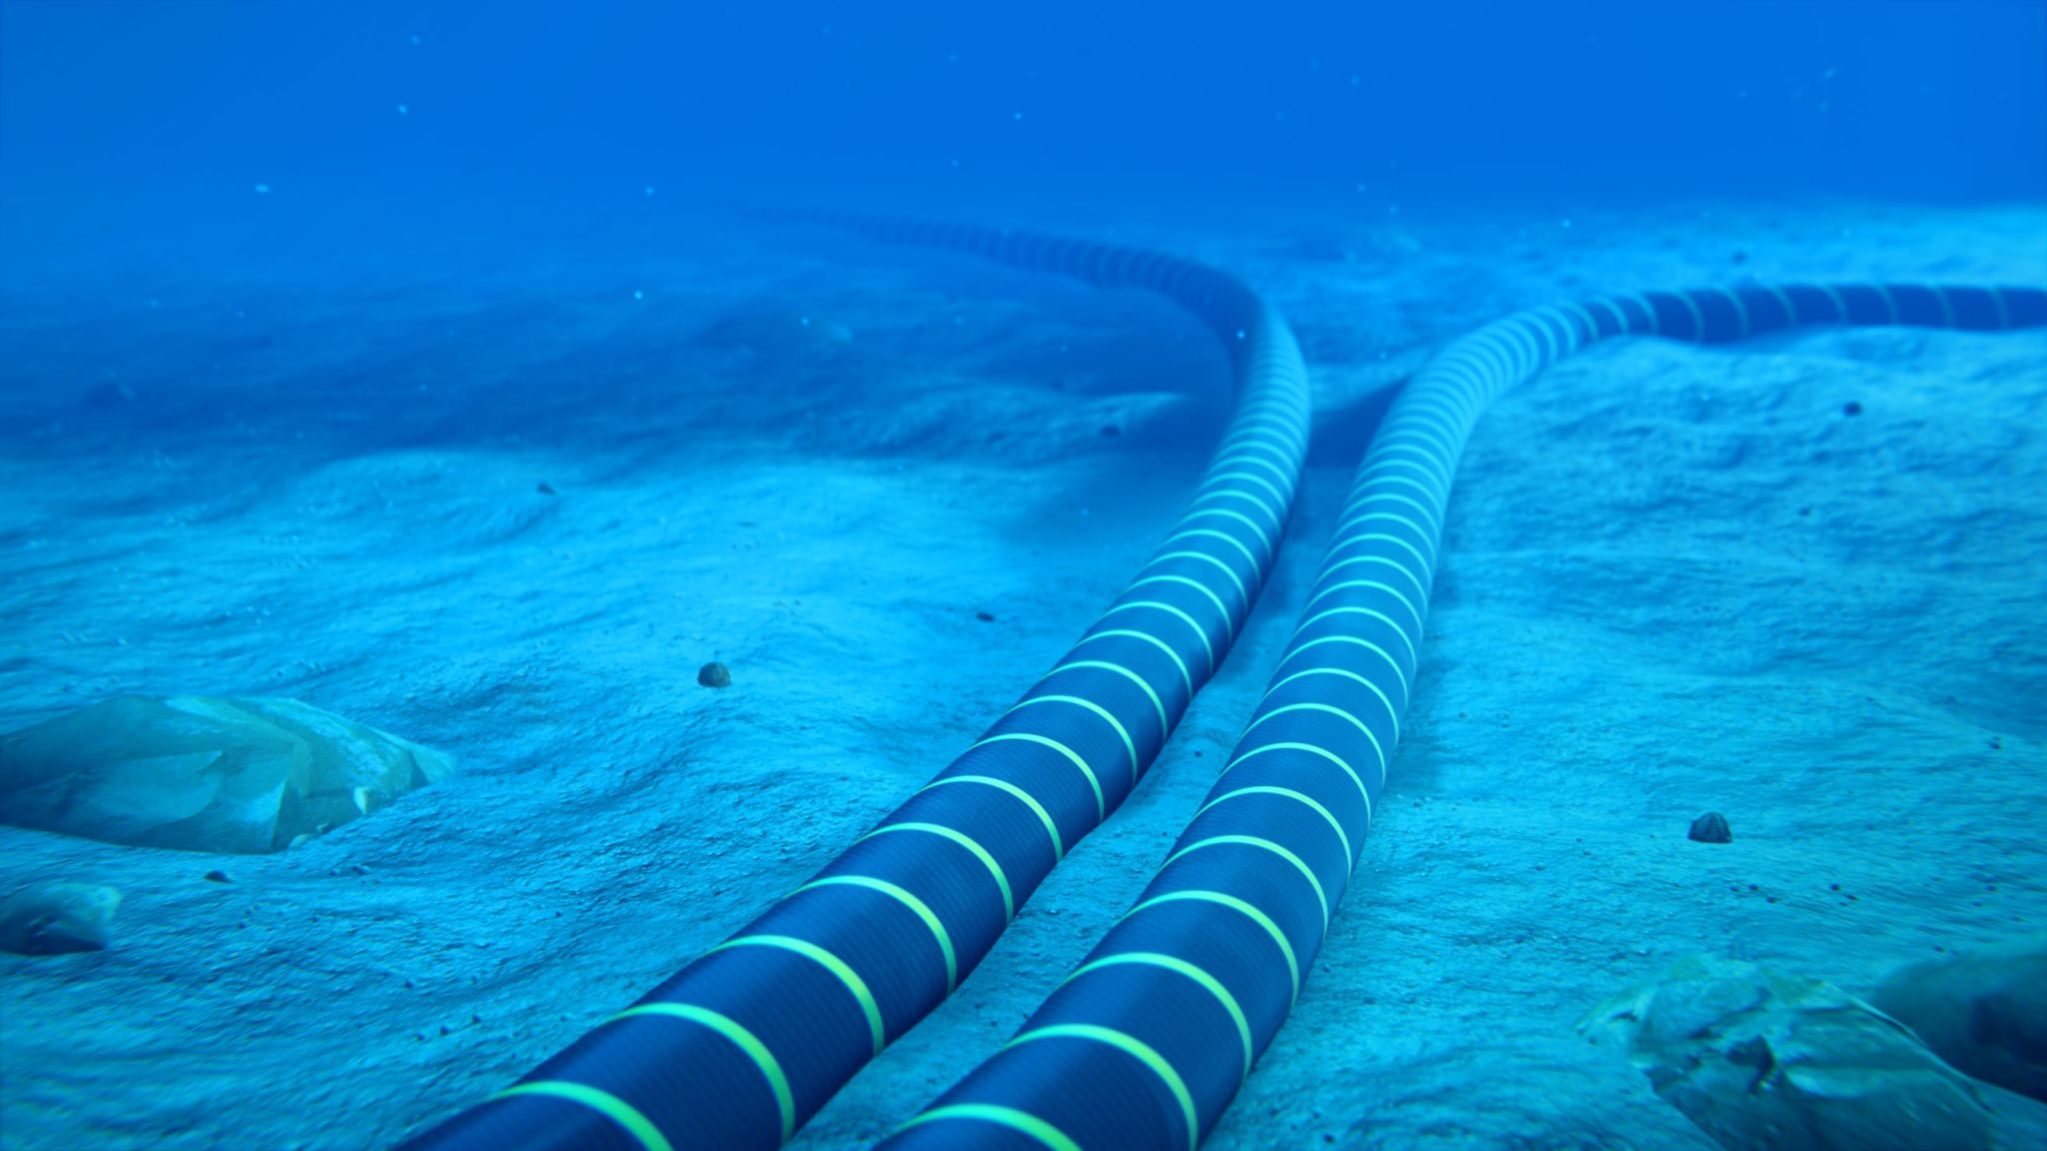 Submarine cables at the bottom of the ocean